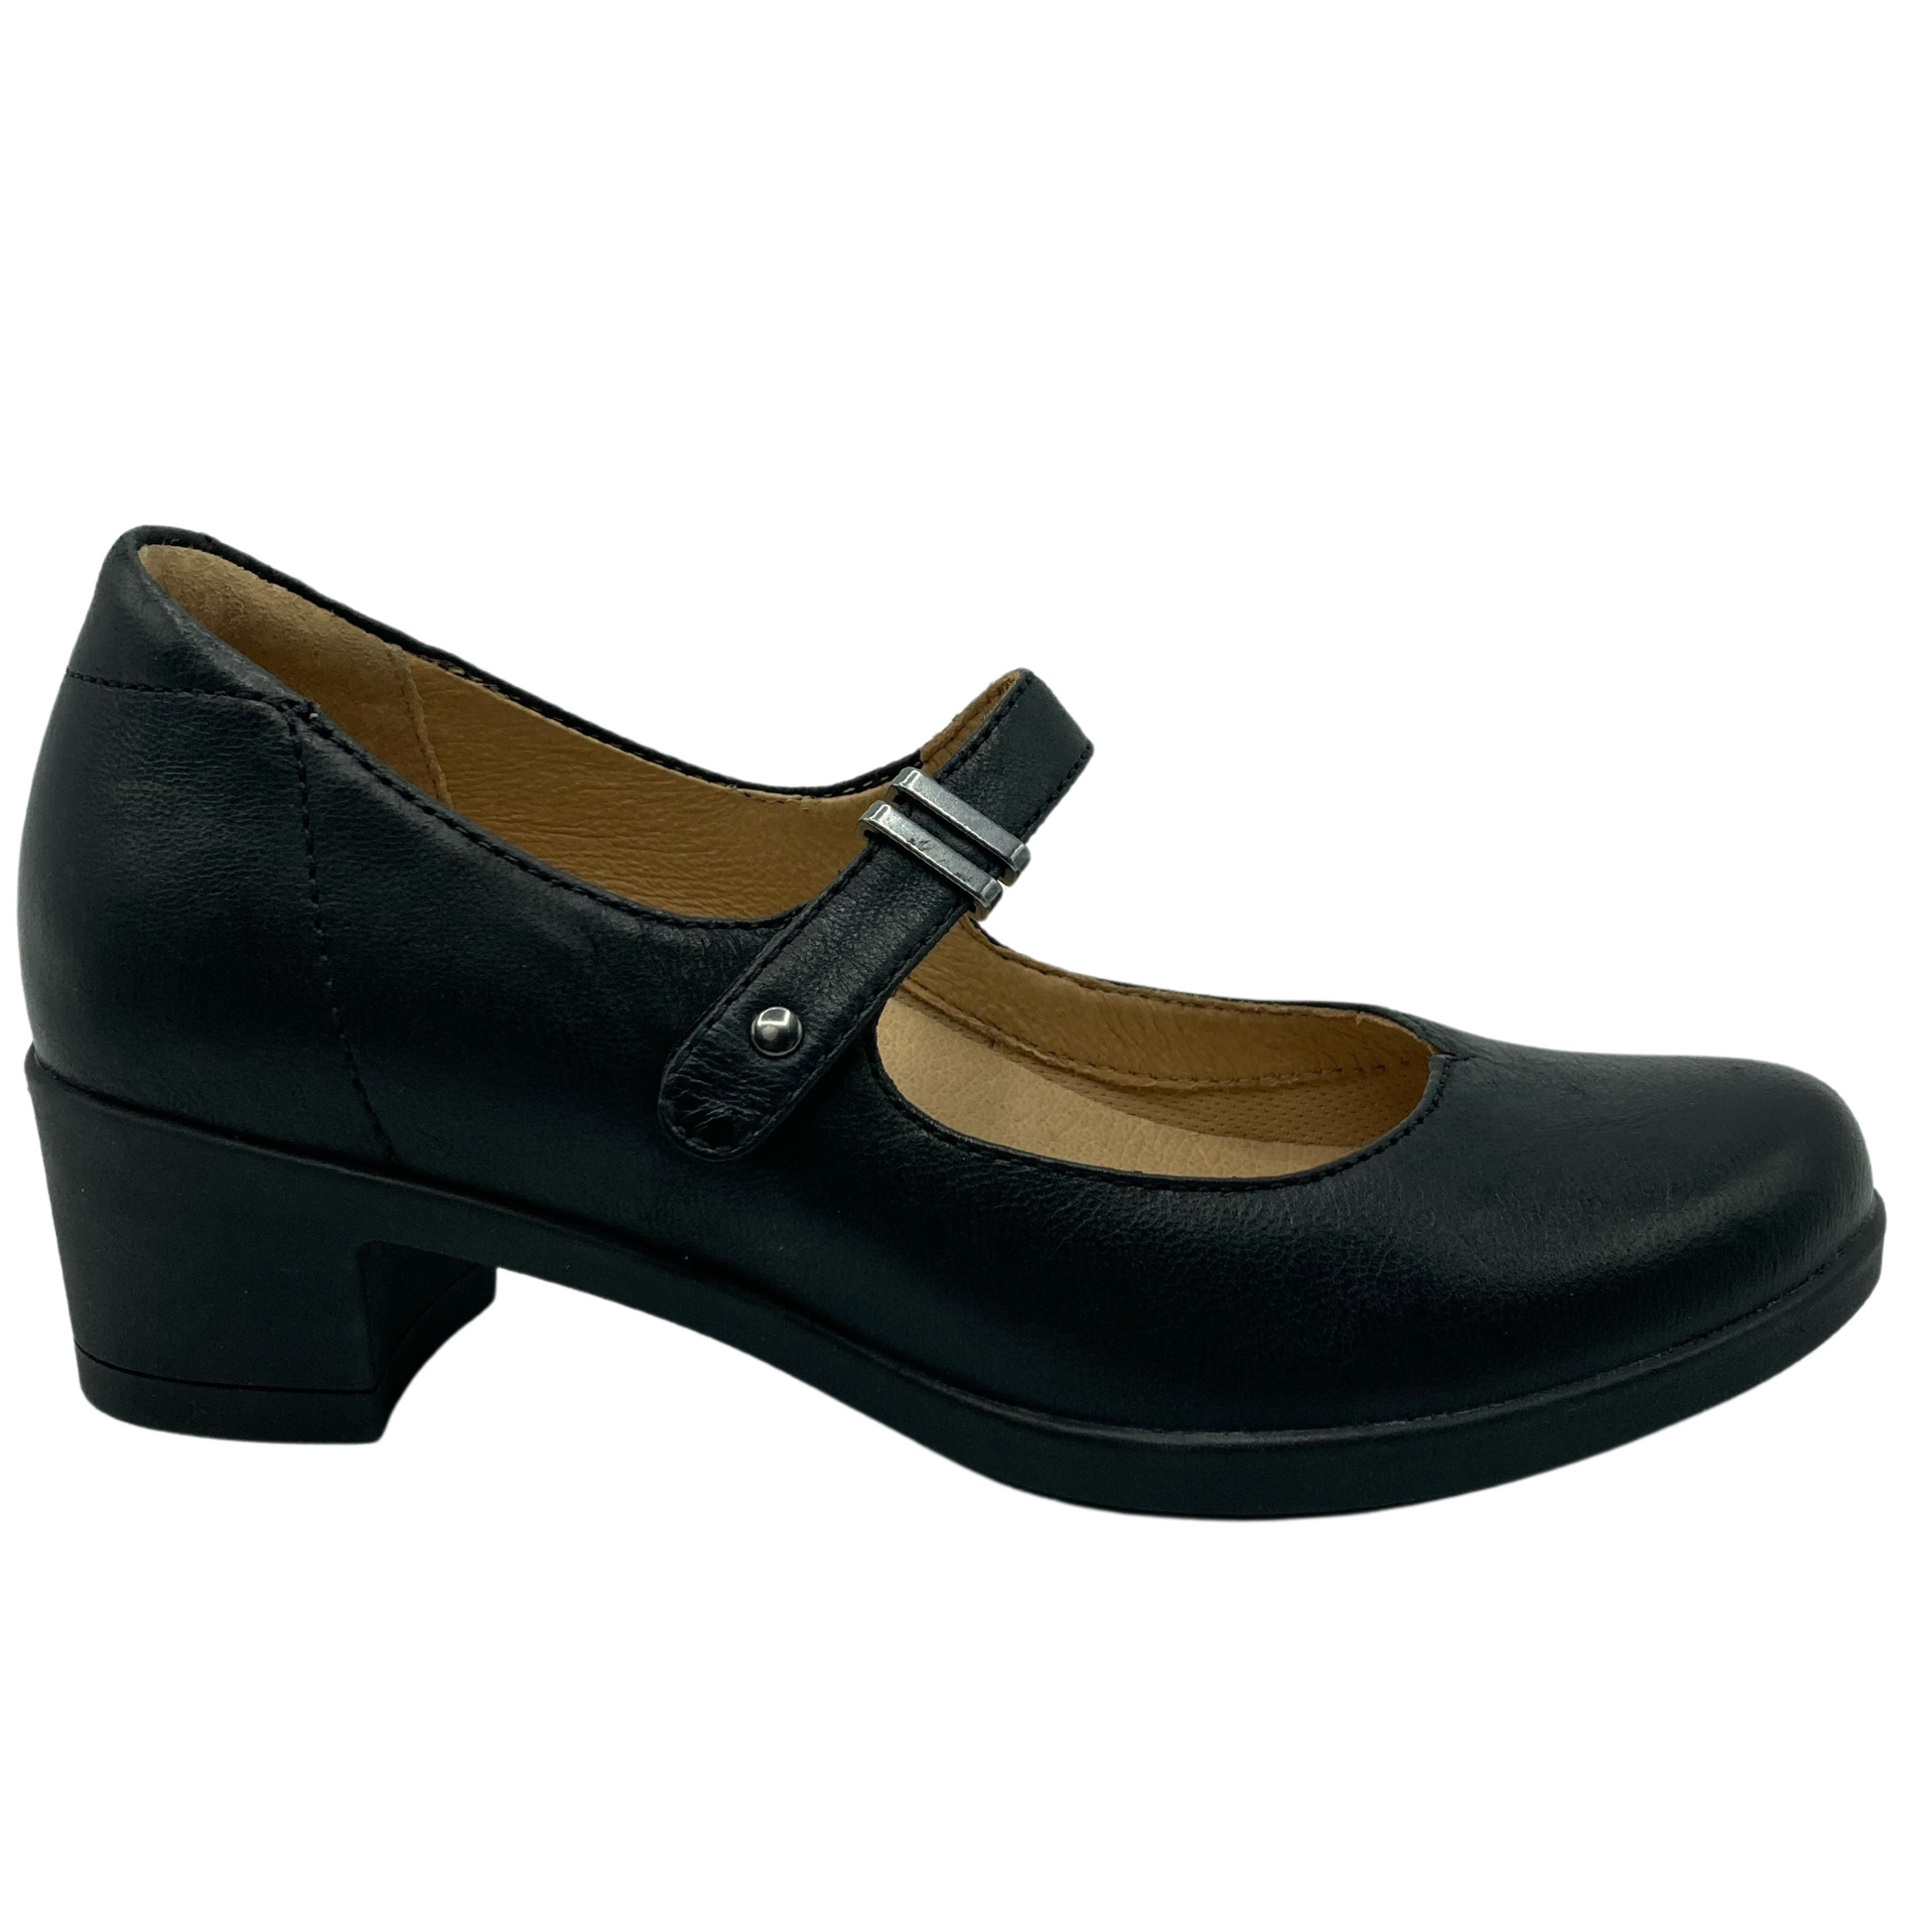 Right facing view of black leather mary jane shoe with low block heel and silver details on the strap